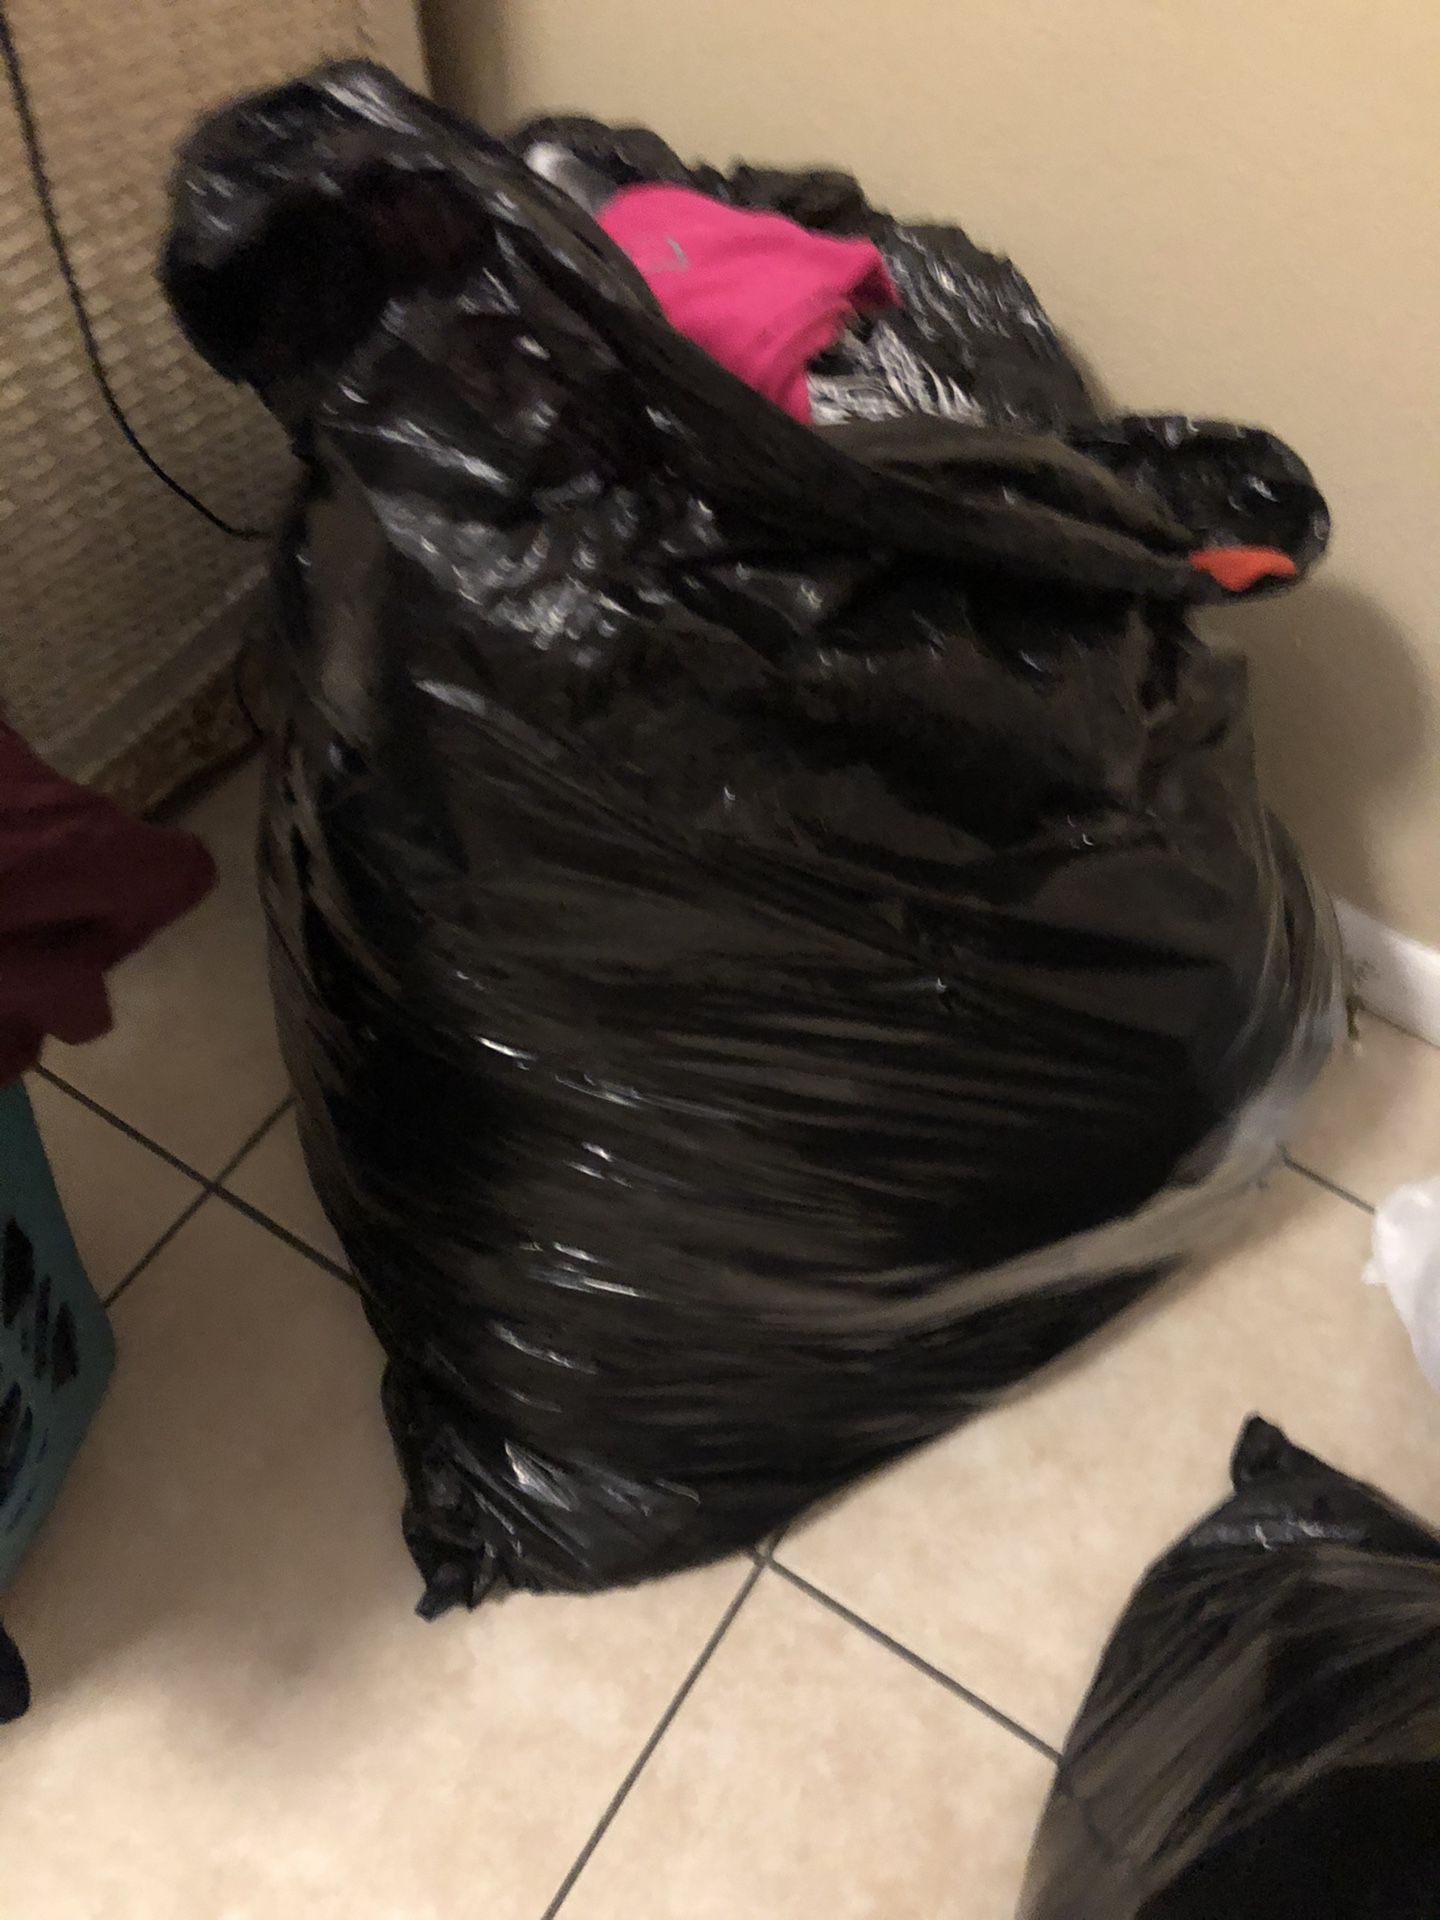 FREE bags of girls/women clothes— PENDING PICKUP*****